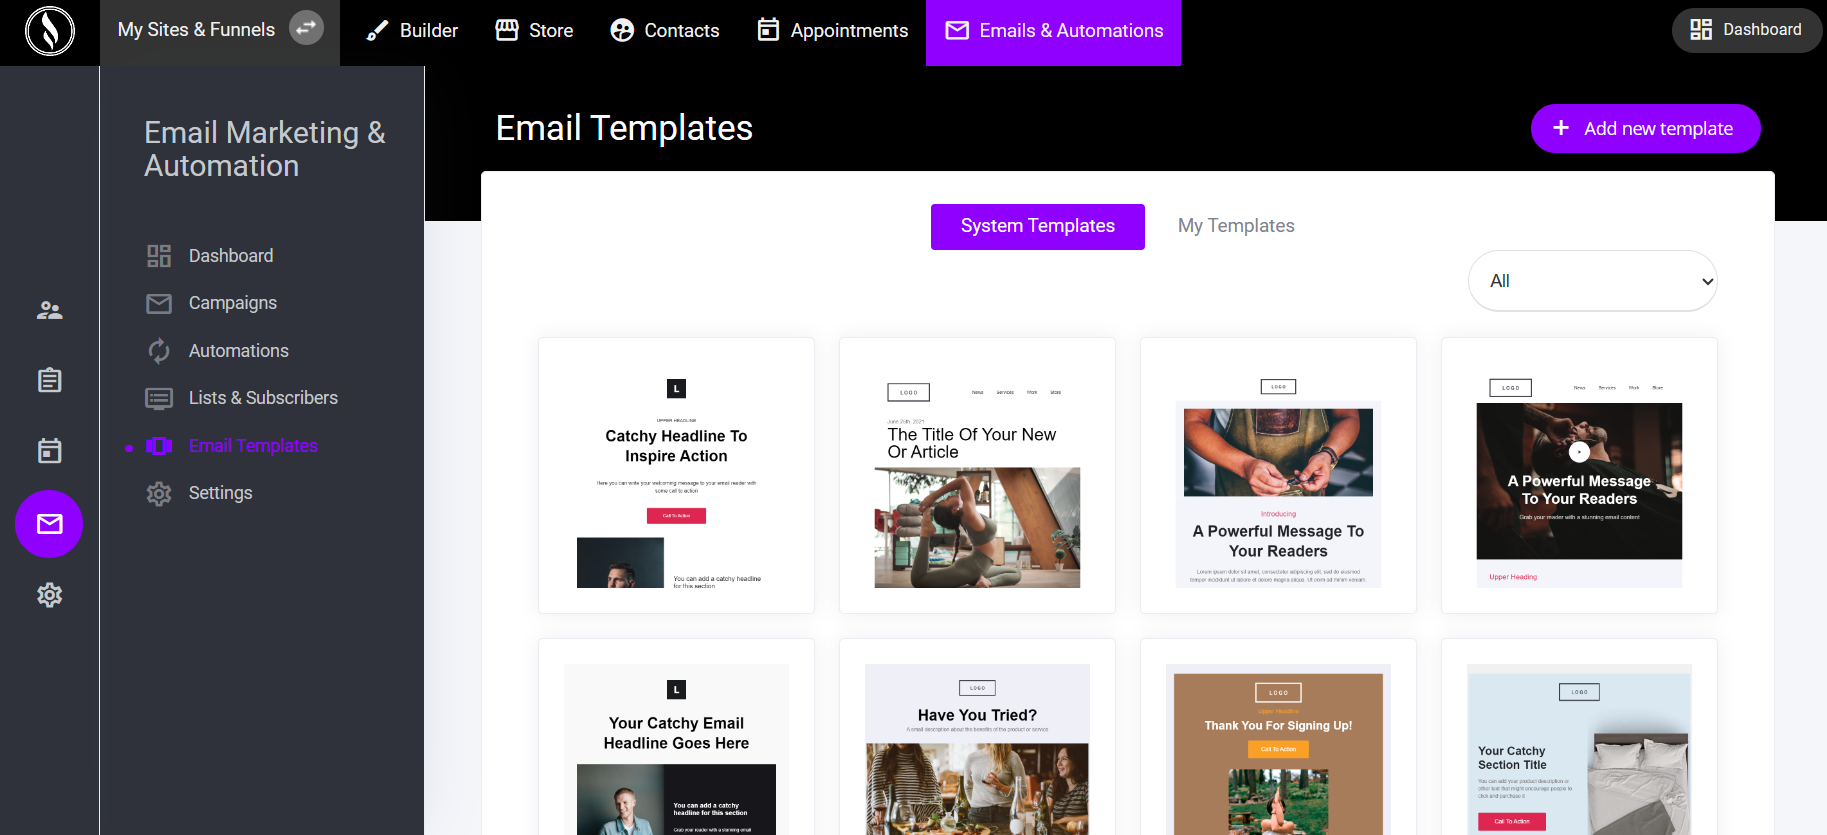 Fully Customisable Templates for all: Website, Landing Pages, Online Stores, Email Marketing